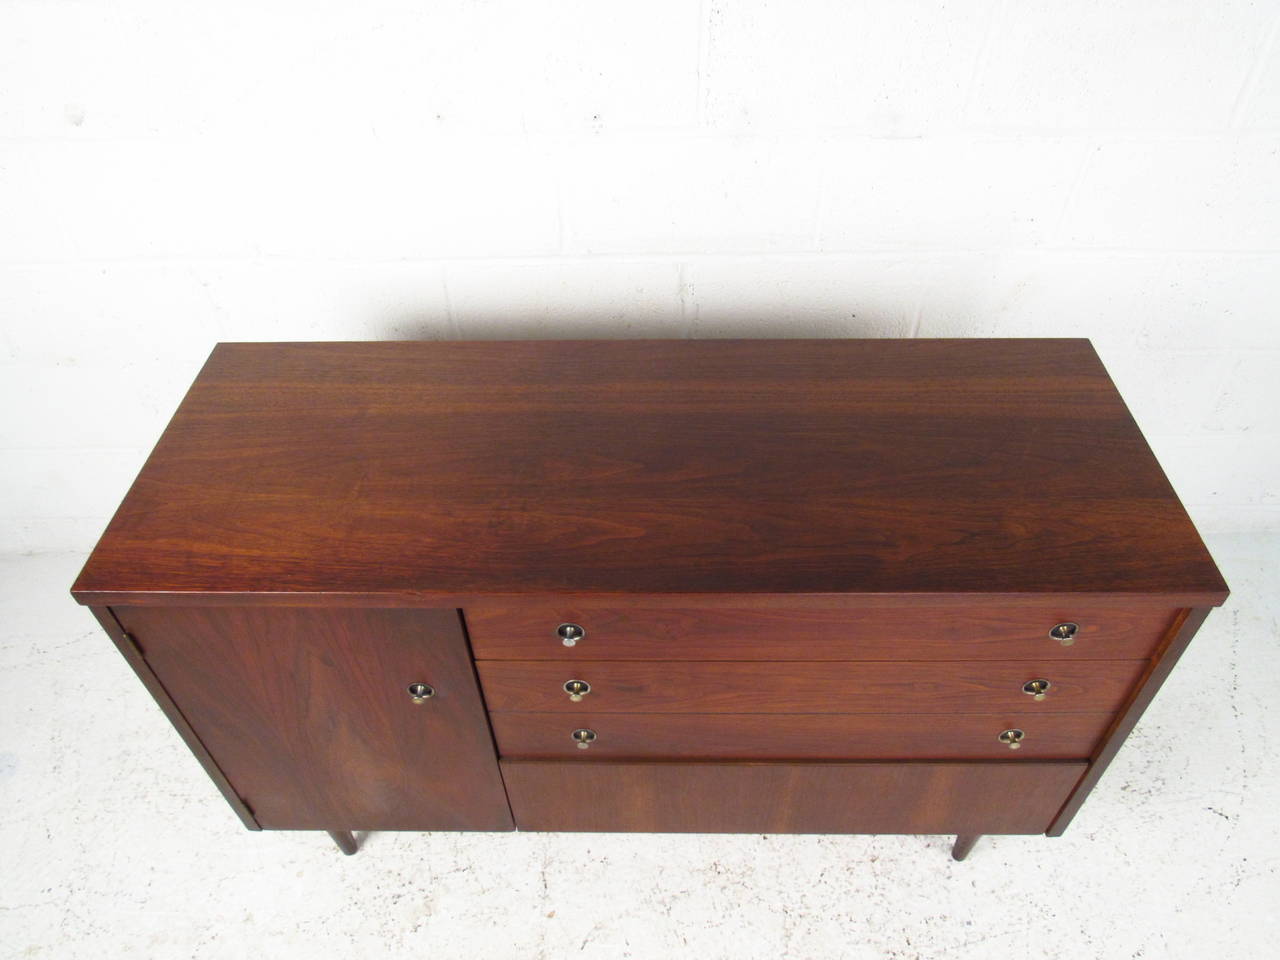 This stylish credenza is the perfect size for compact & stylish storage in any room. Whether used for dinner service, bedroom organization, or as a TV  credenza, this vintage Bassett piece makes an attractive mid-century addition. Please confirm